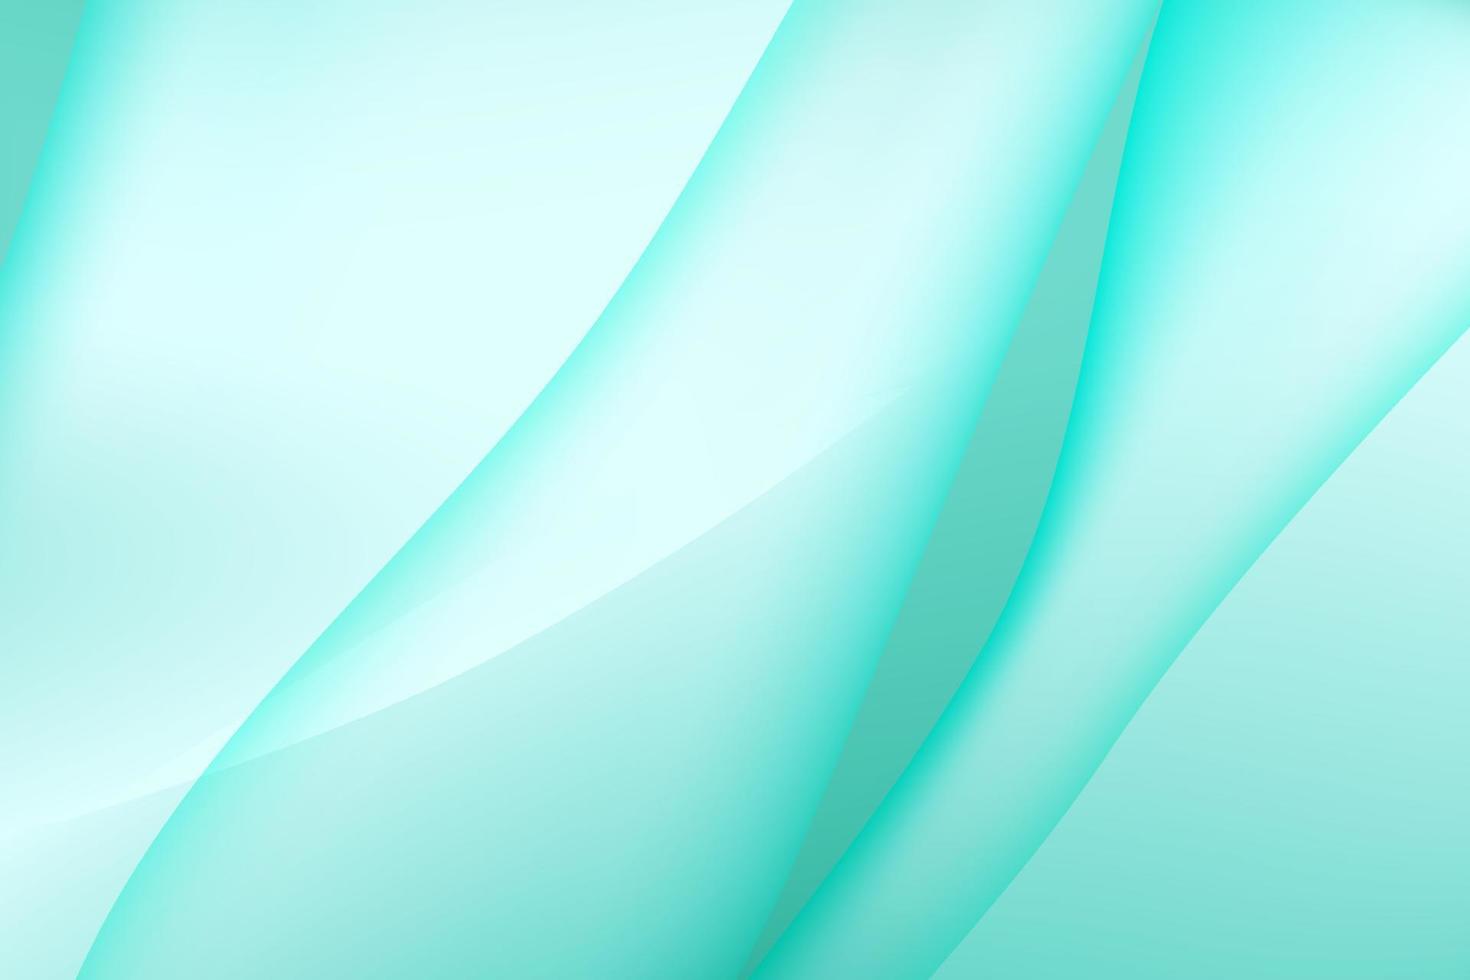 Abstract Blue Green Curved Wavy Background. Technology backgrounds vector